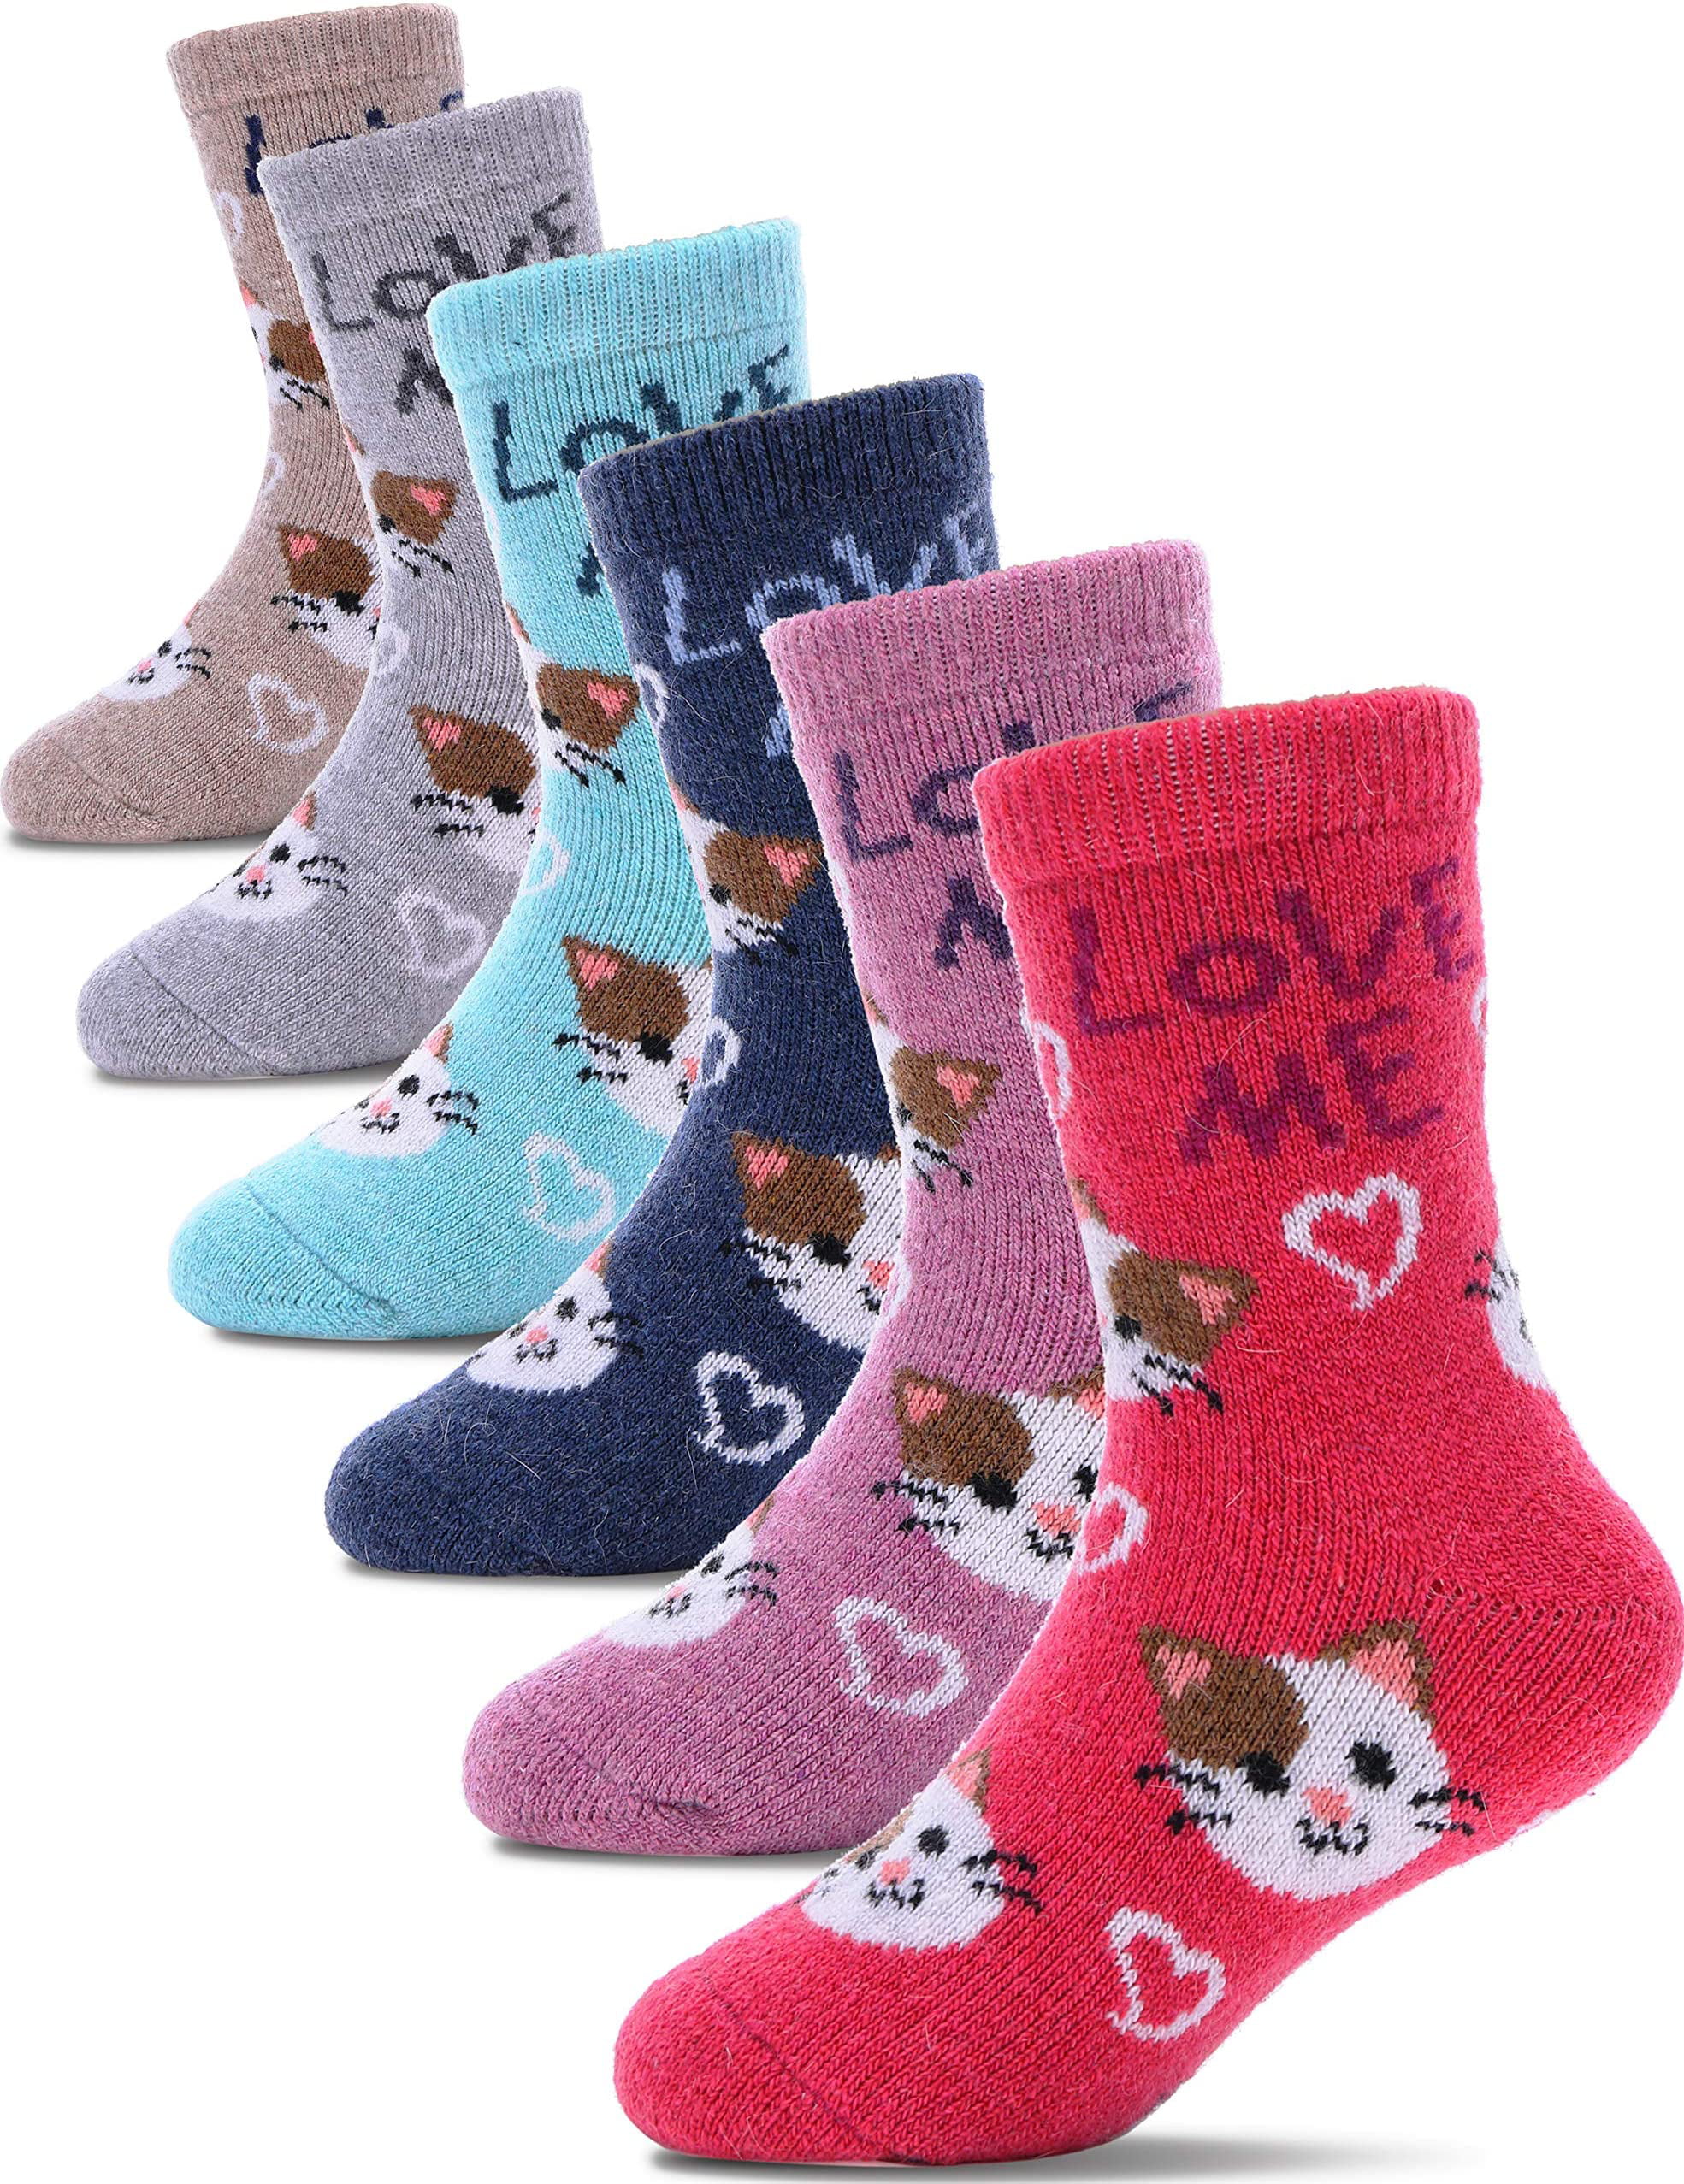 ProEtrade Wool Socks for Kids Boys Girls Toddlers Winter Warm Thermal Walking Thick Heavy Boot Cosy Hiking Gift Socks 6 Pairs